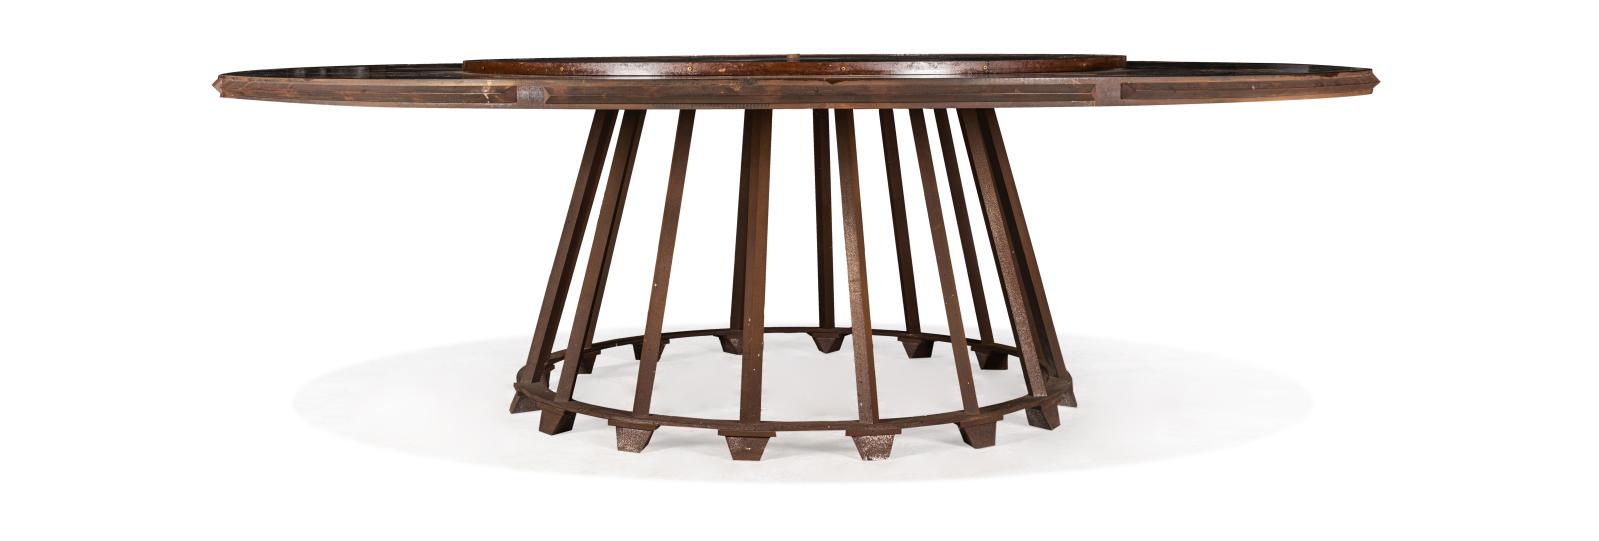 Round table with varnished copper turntable and oxidized steel base, unique piece, h. 79, diam. 258 cm/101.6 in.Estimate: €10,000/15,000